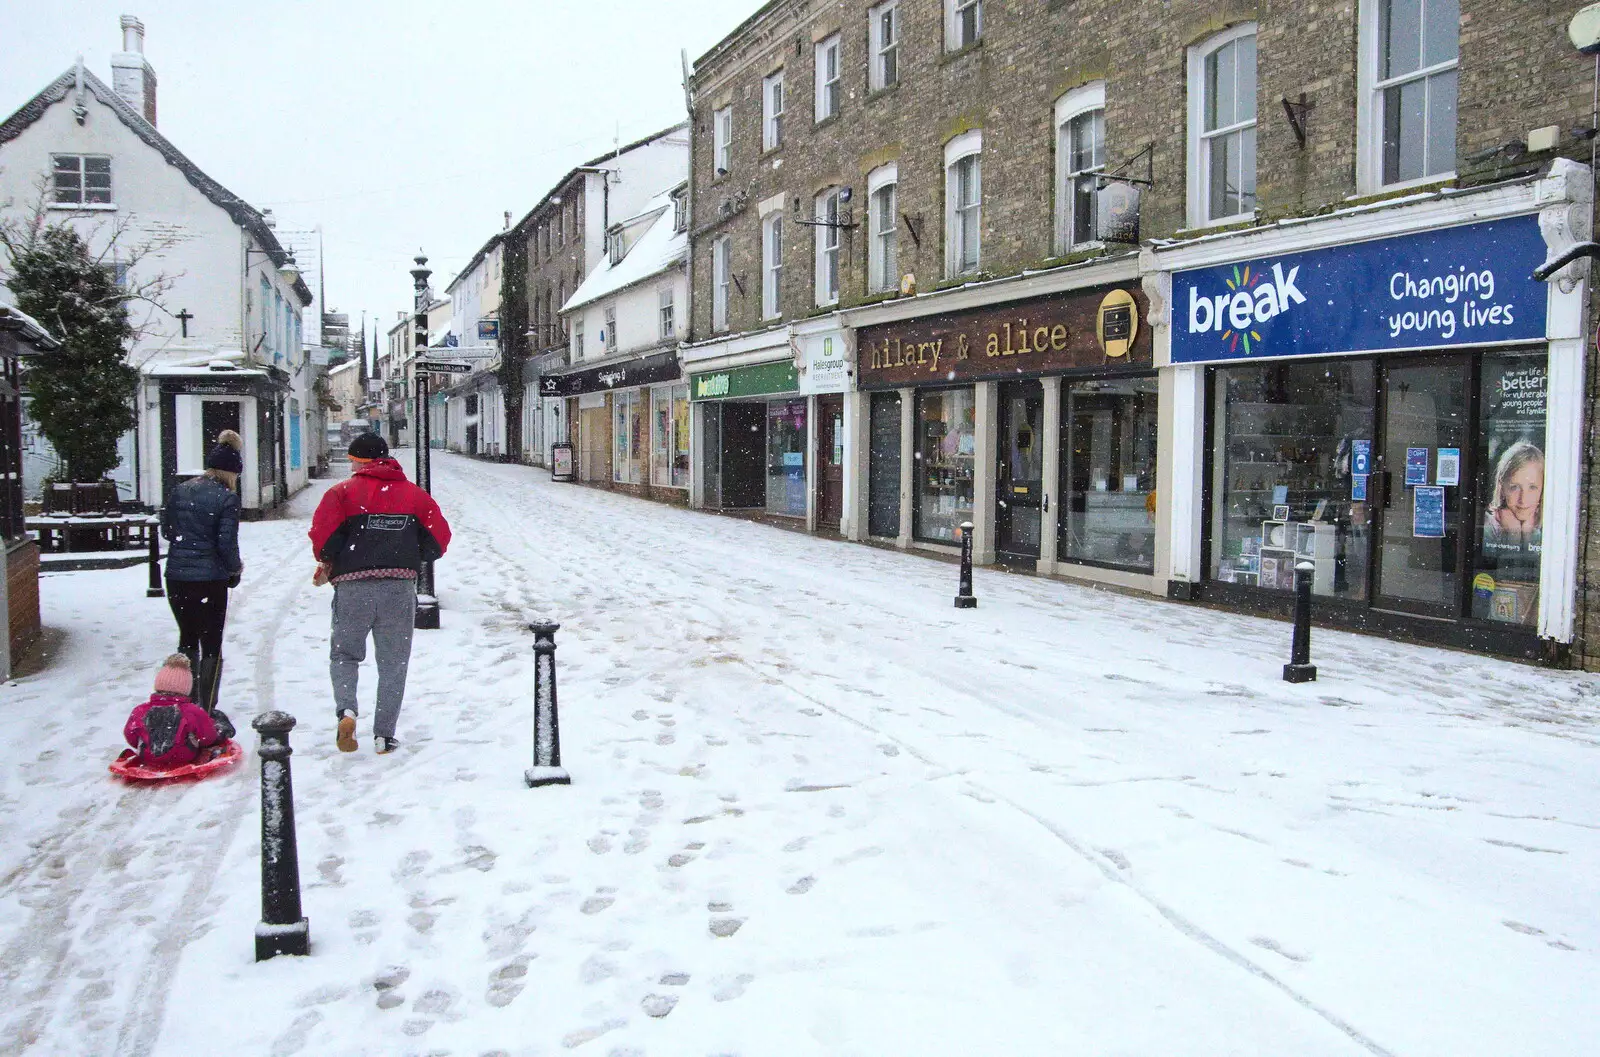 A child gets hauled up Mere Street on a sledge, from A Snowy Morning, Diss, Norfolk - 16th January 2021